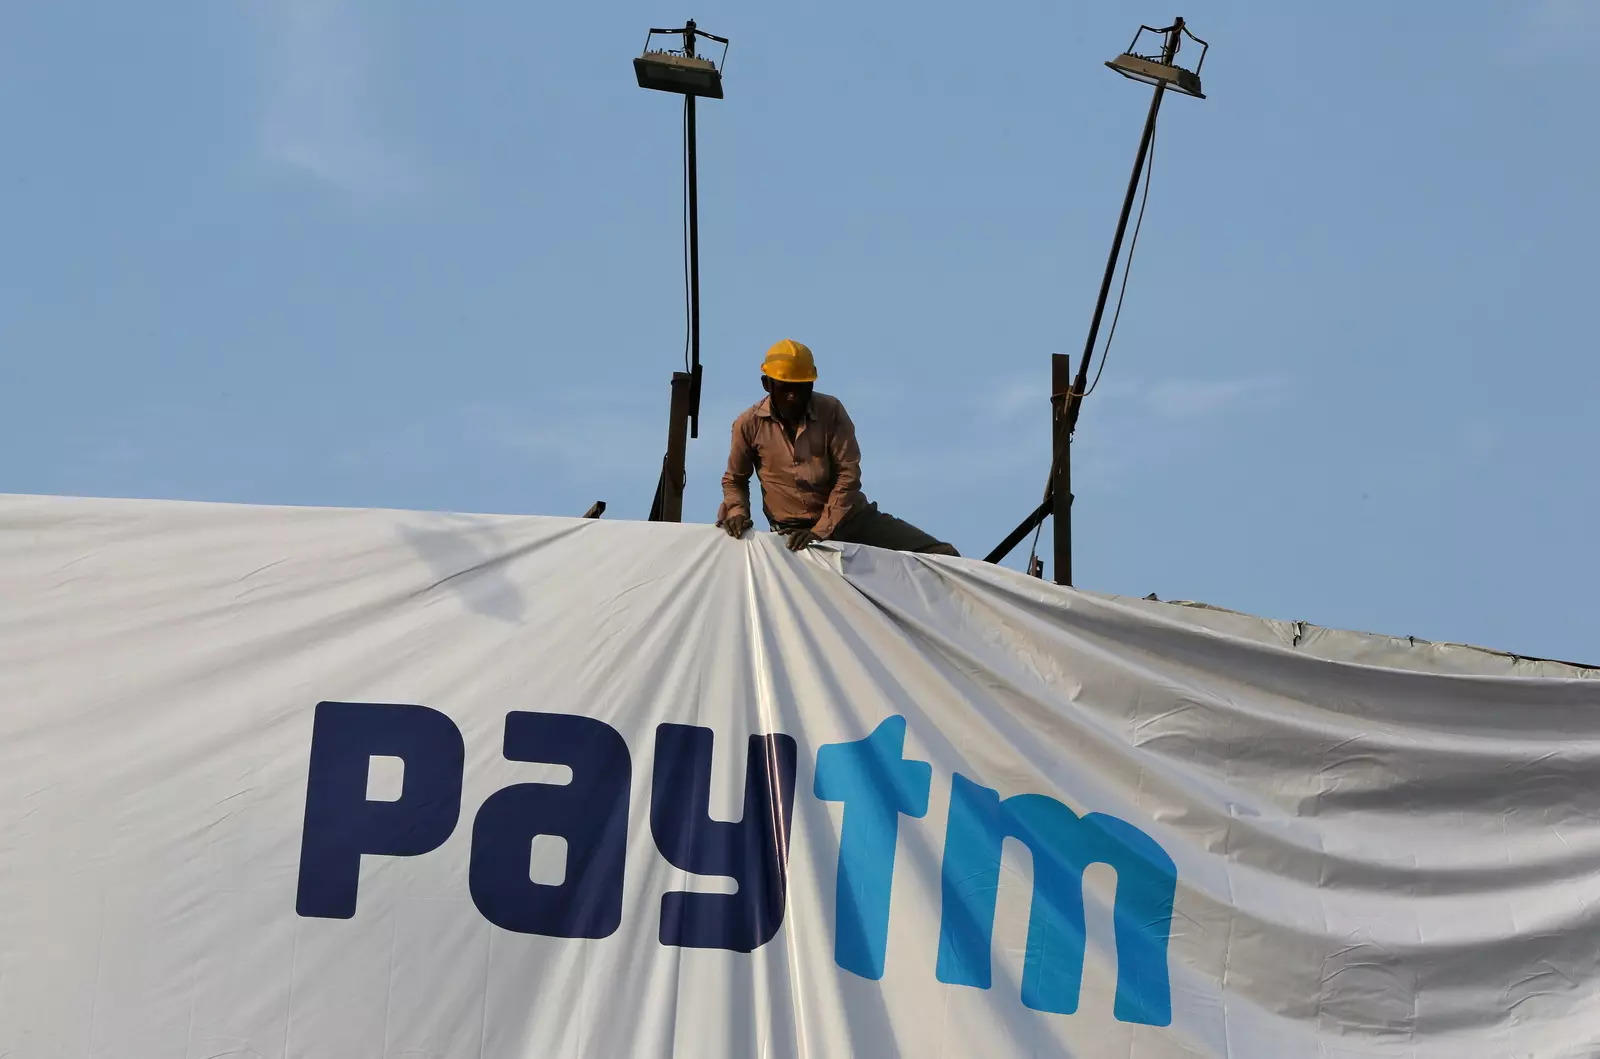 More global biggies line up for Paytm's $2.2-billion IPO